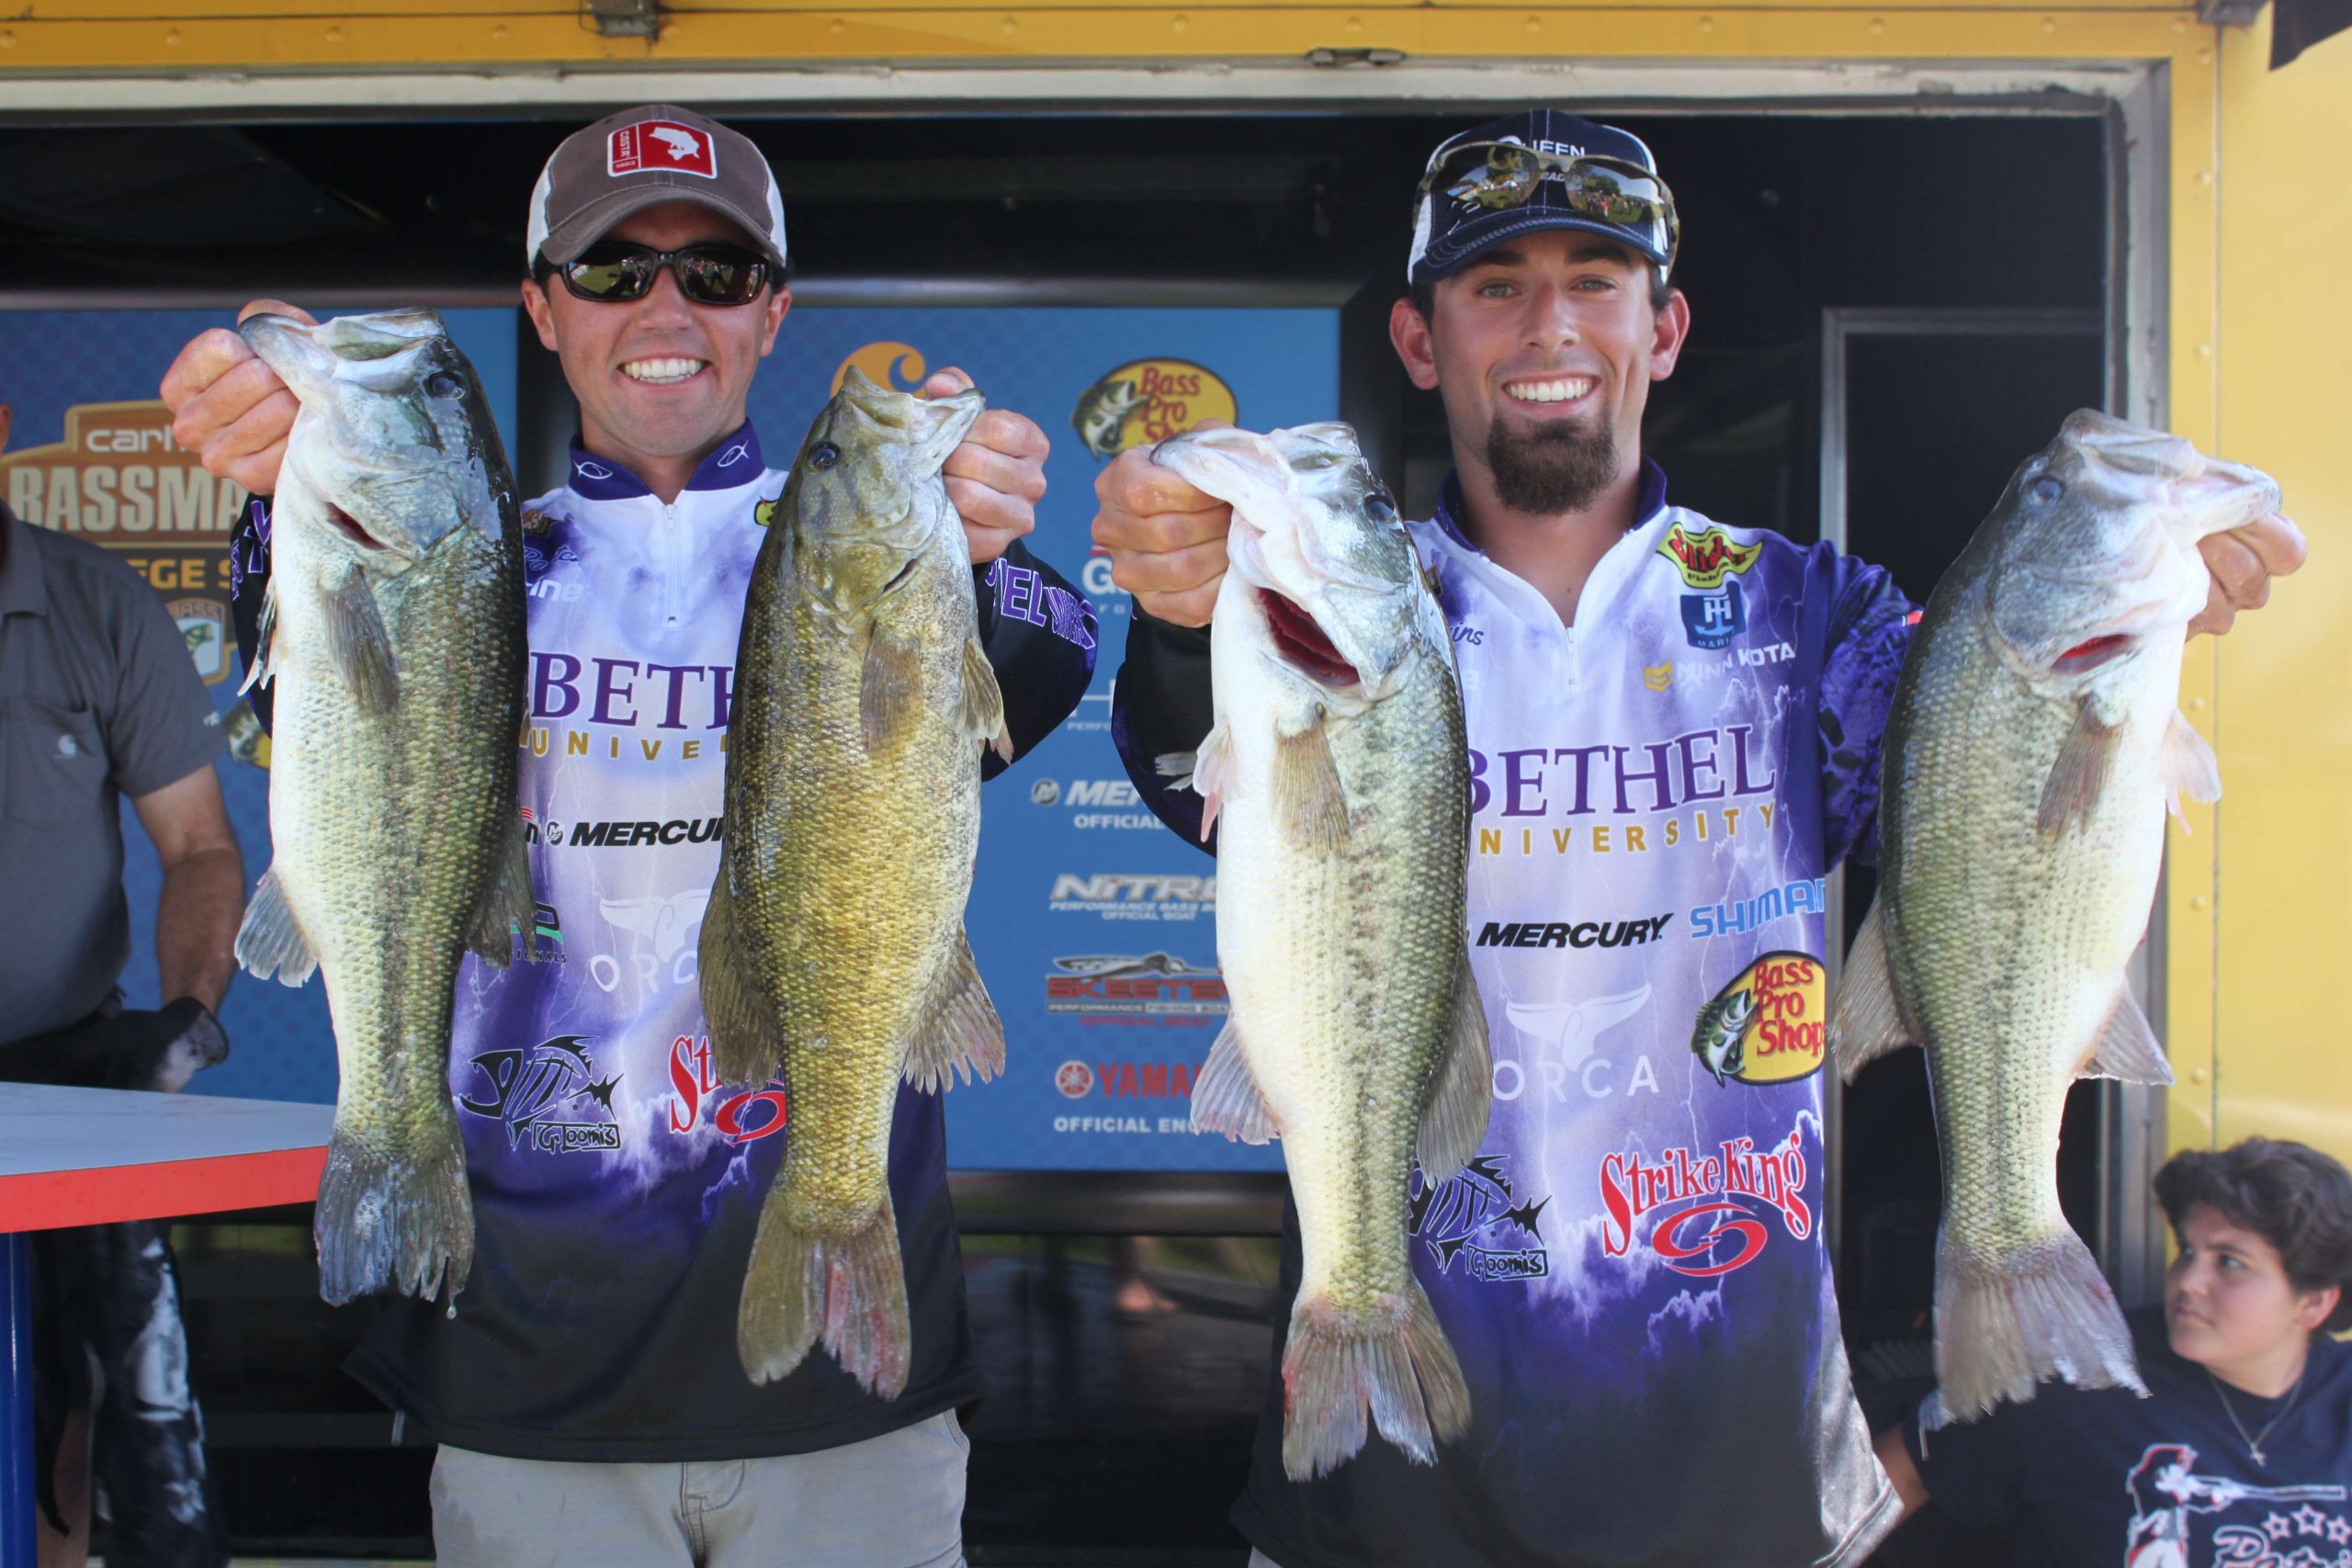 And thereâs our Day 1 leaders. Bethelâs Cully Scroggins and Nathon Portch had a handsome limit of five bass (three largemouth, two smallmouth) that weighed 17-7.